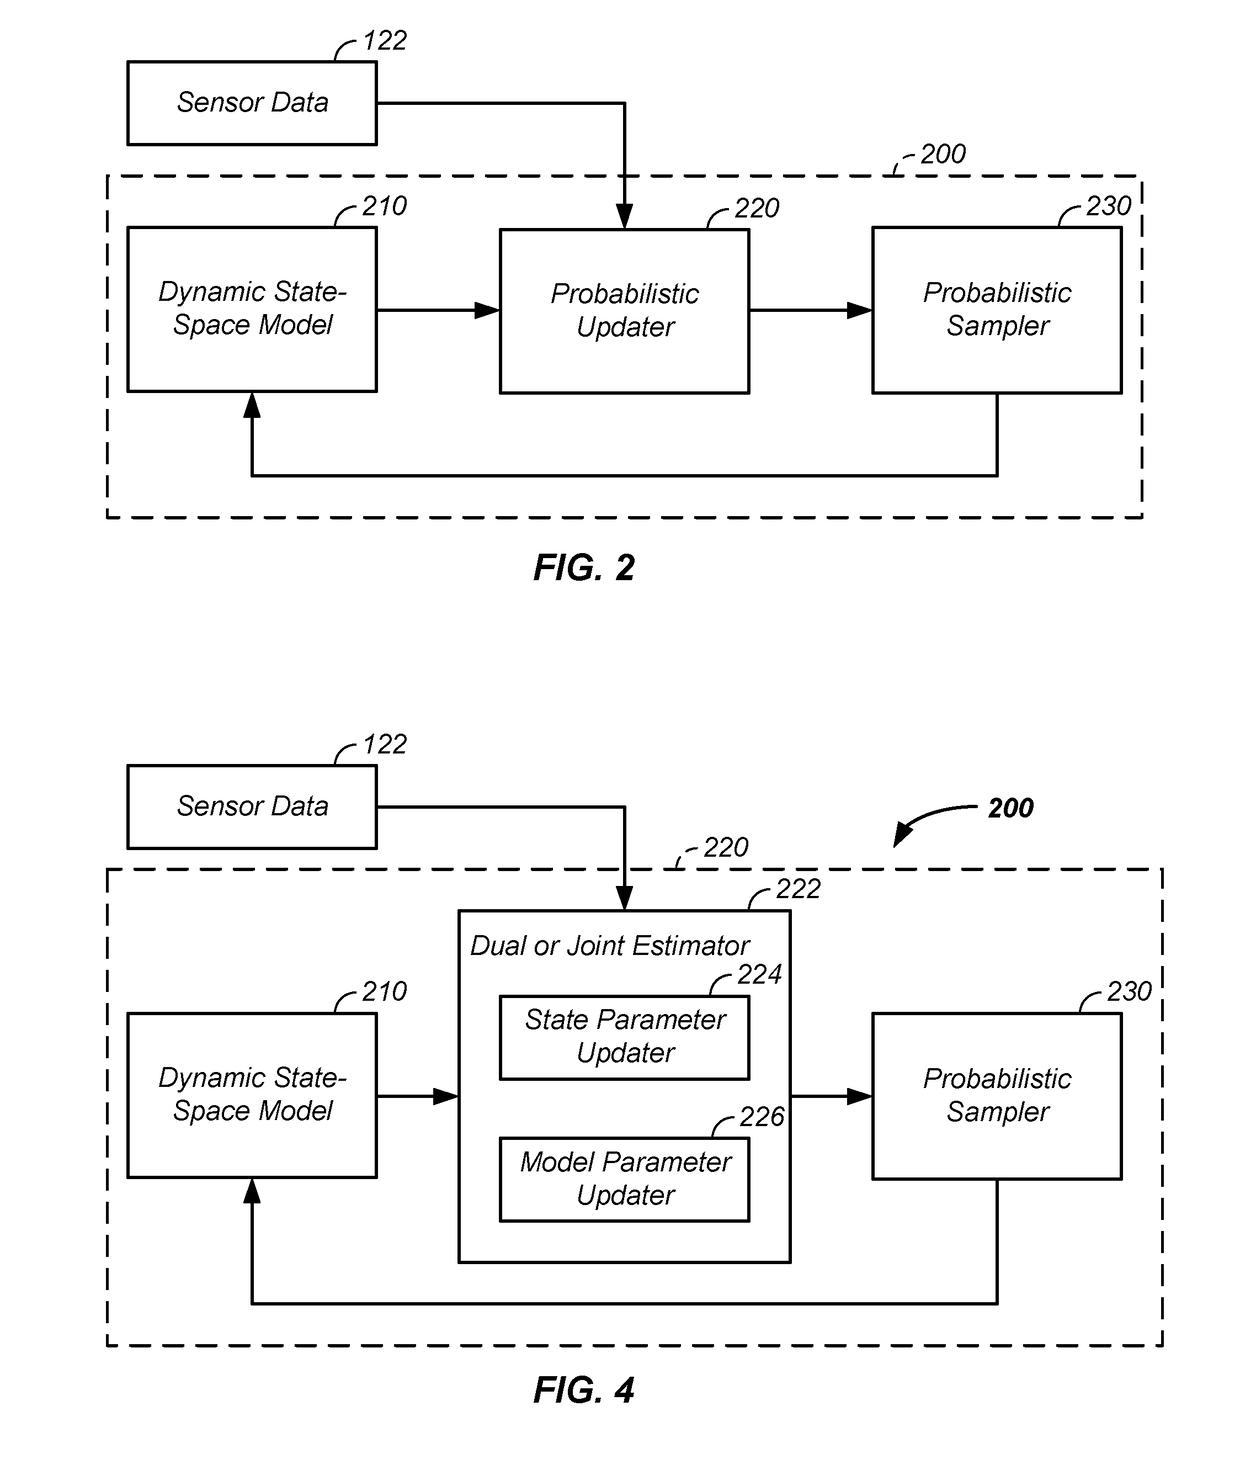 Iterative probabilistic parameter estimation apparatus and method of use therefor